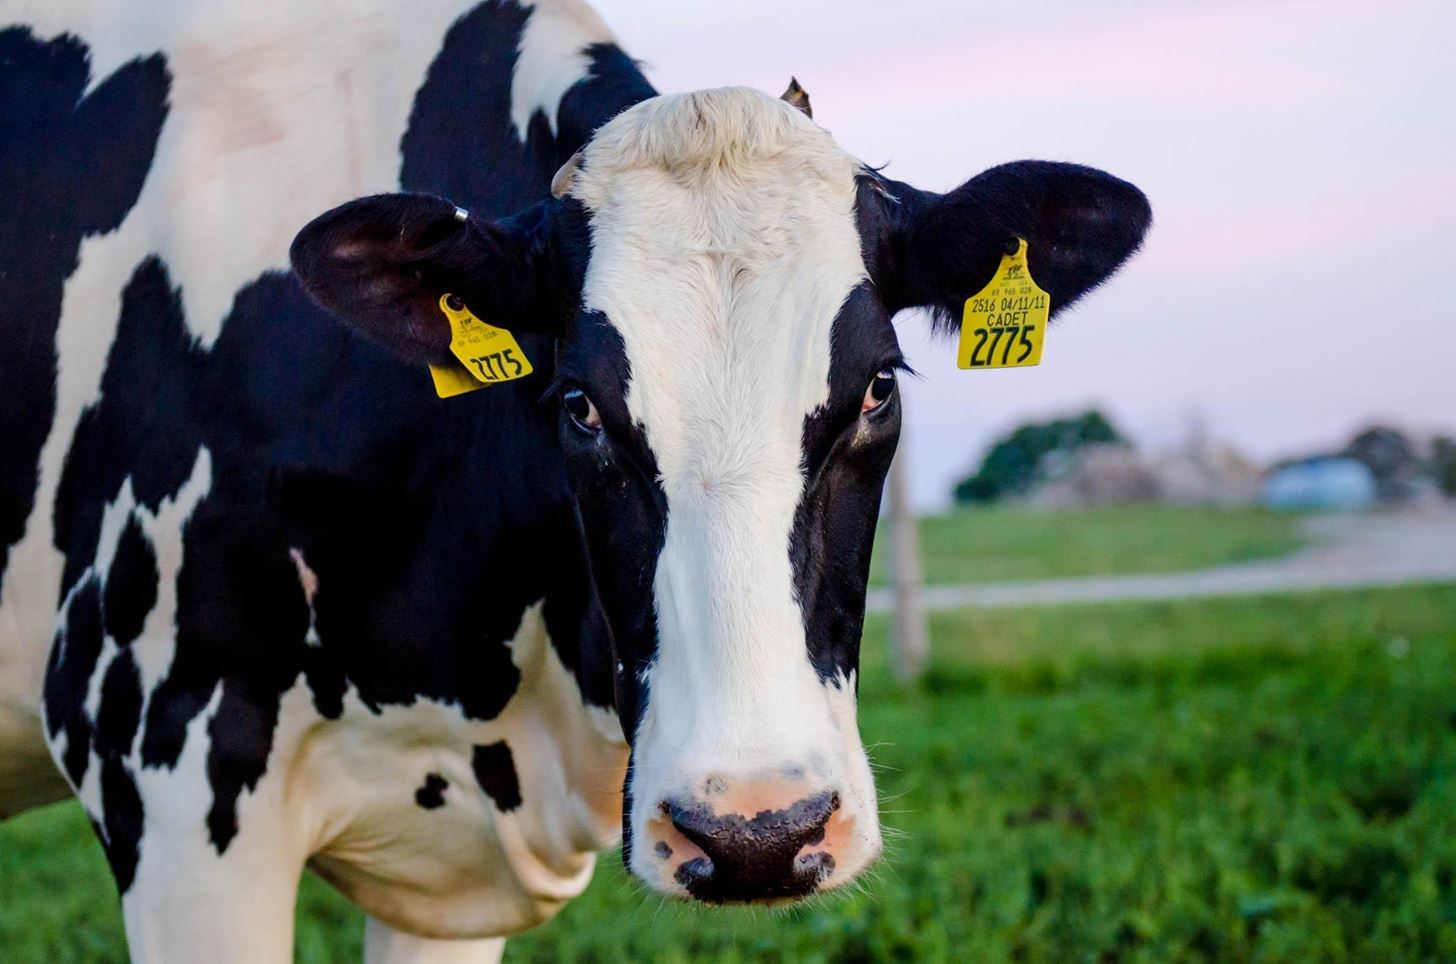 Pasteurization Has Saved Millions of Lives, So Why Do People Want to Drink Raw Milk?